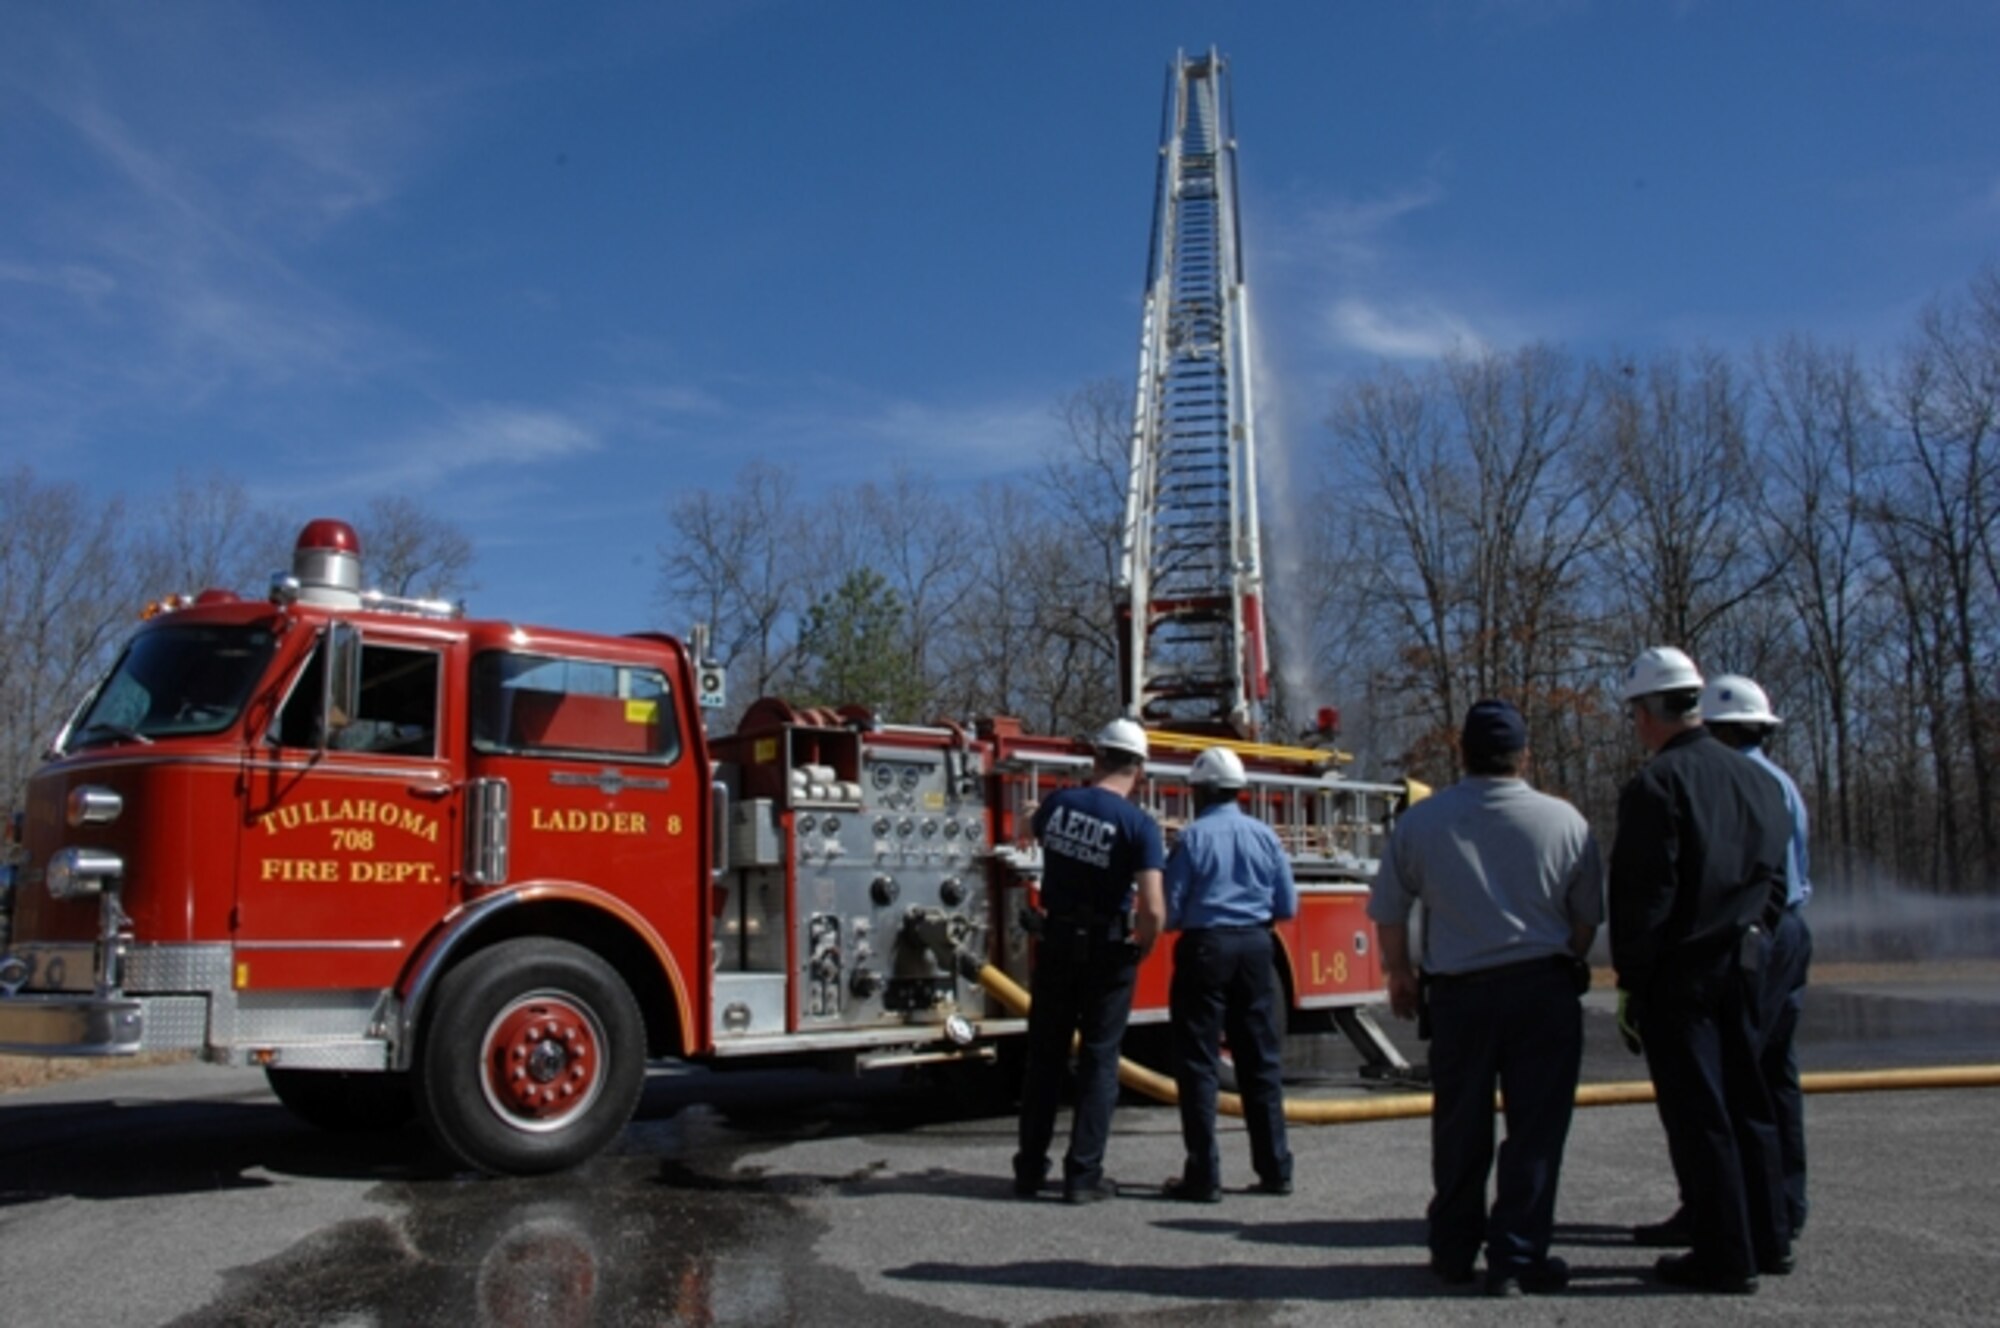 Tullahoma firefighters demonstrate their 75-foot aerial platform truck to their Arnold Engineering Development Center counterparts during a day of training. 